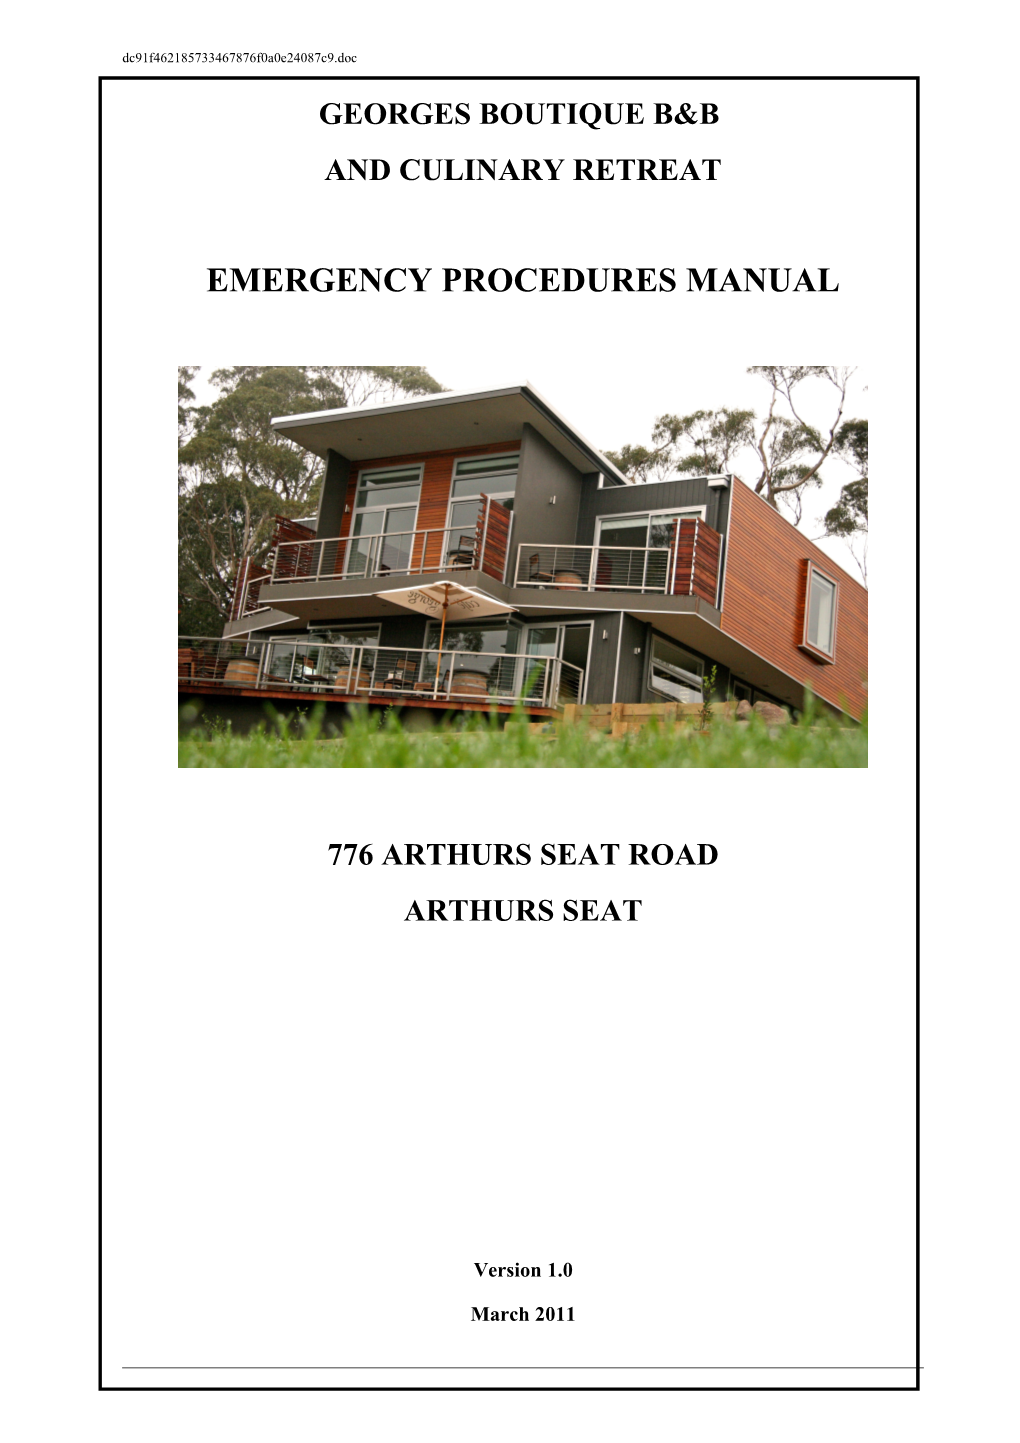 Emergency Planning And